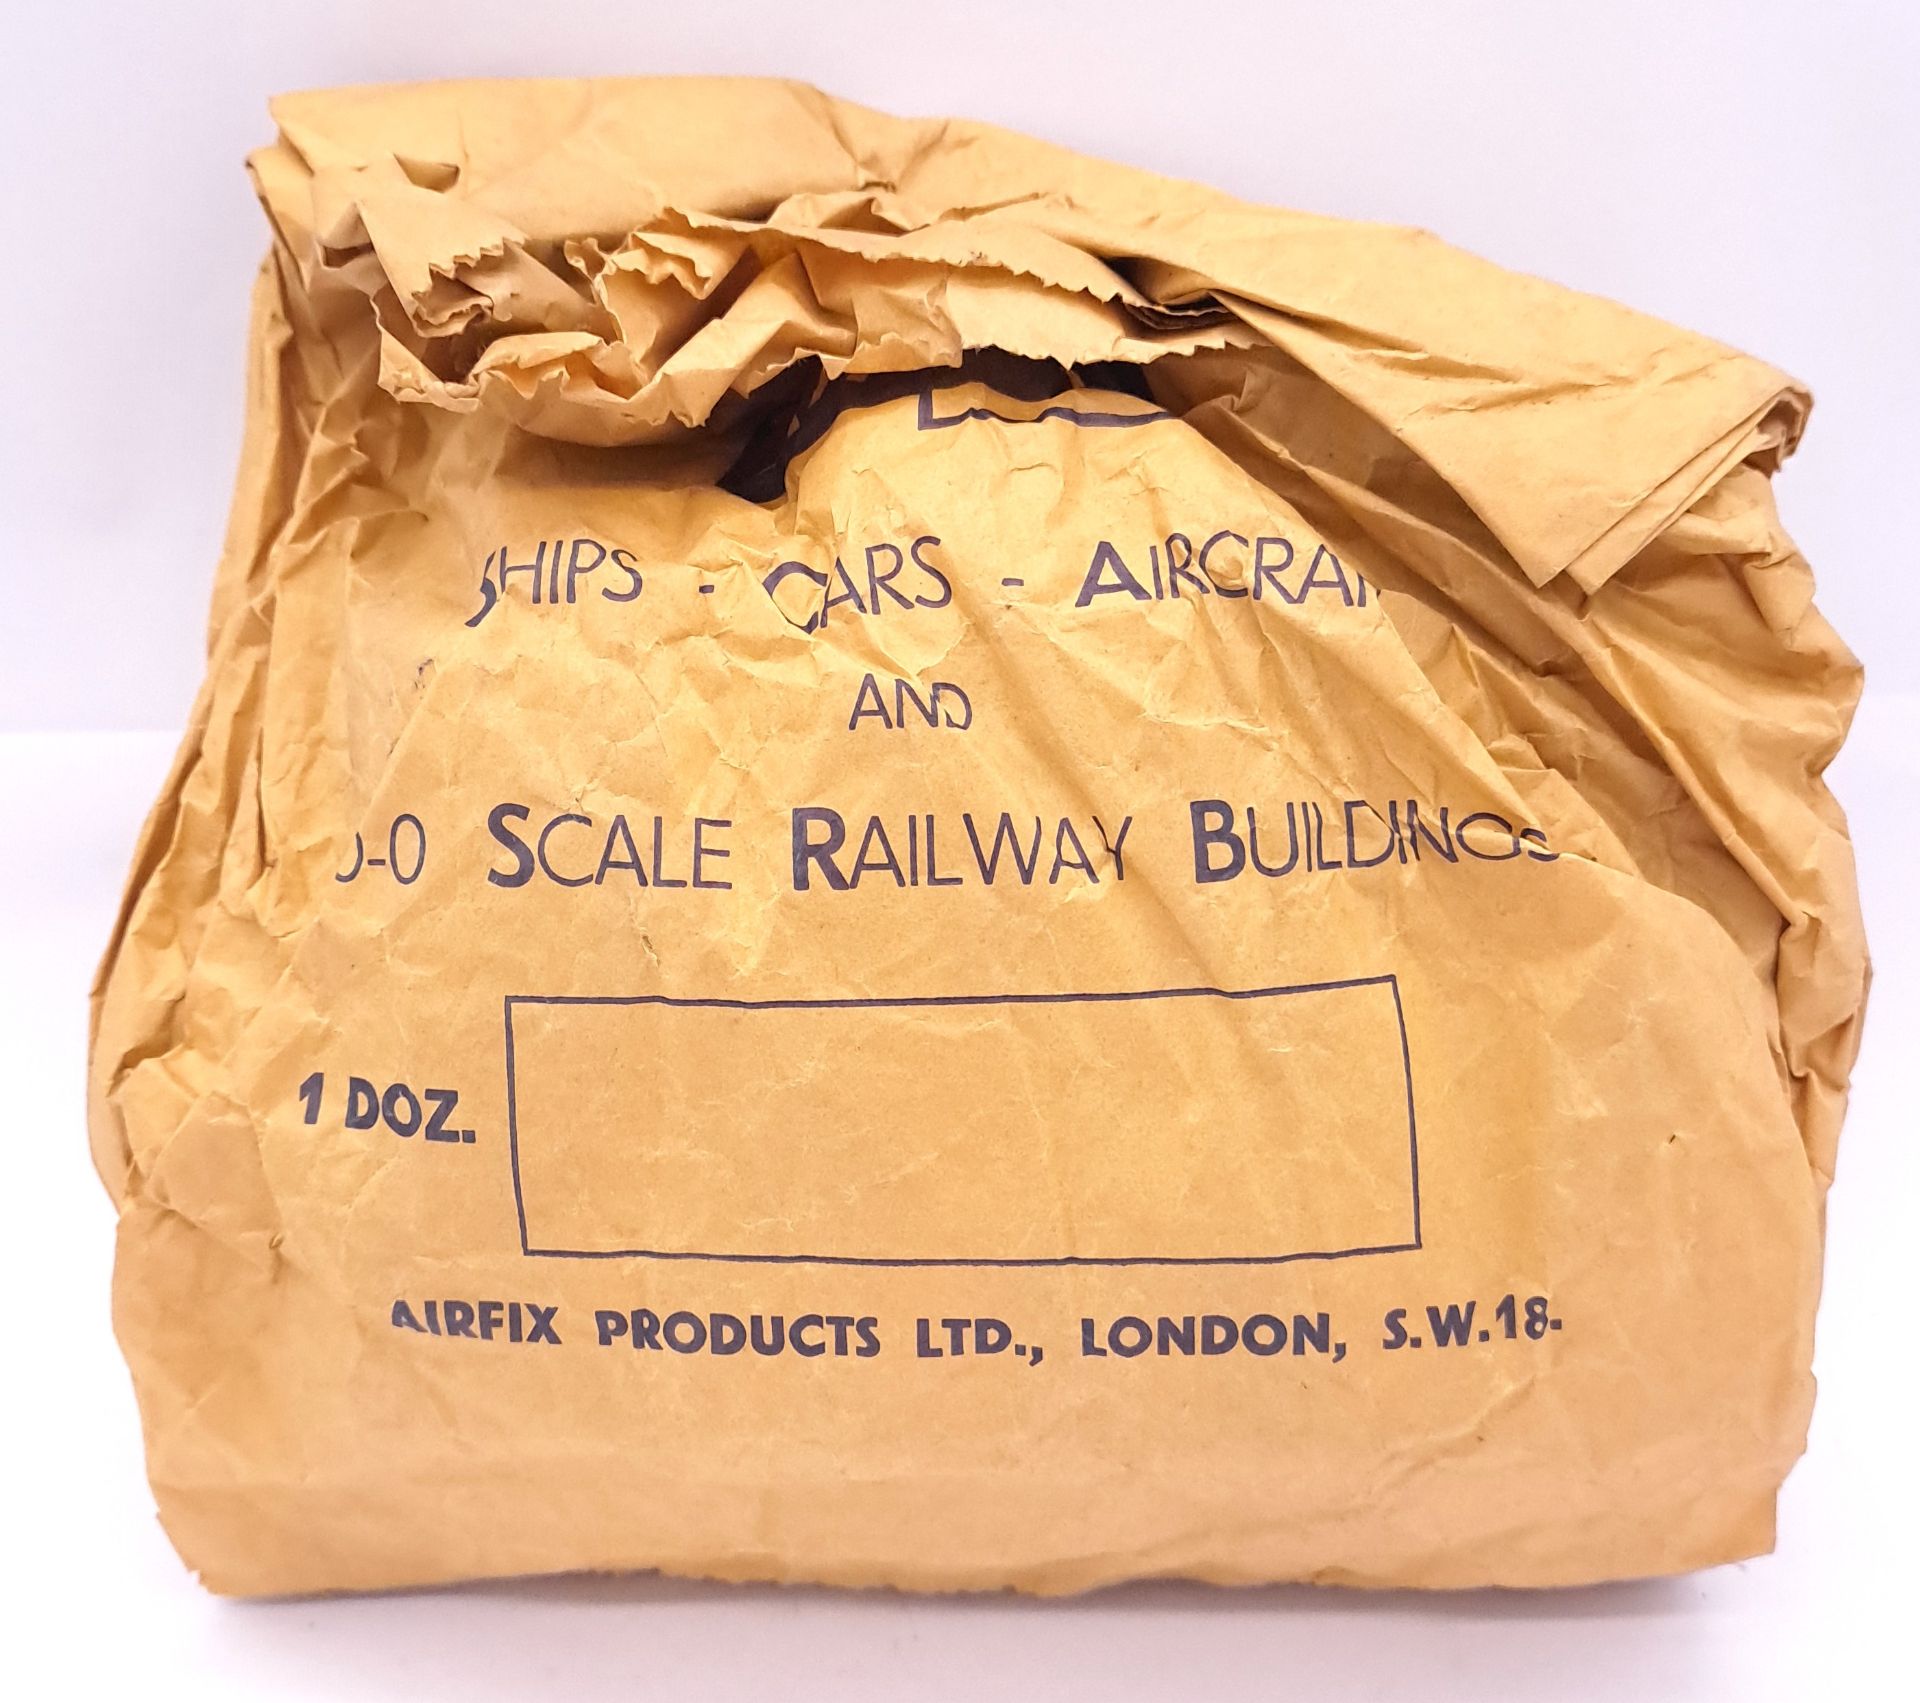 Airfix c1960’s ORIGINAL TRADE BAG complete with Bagged (possibly Type3) “Wildcat” Kits - Image 2 of 7